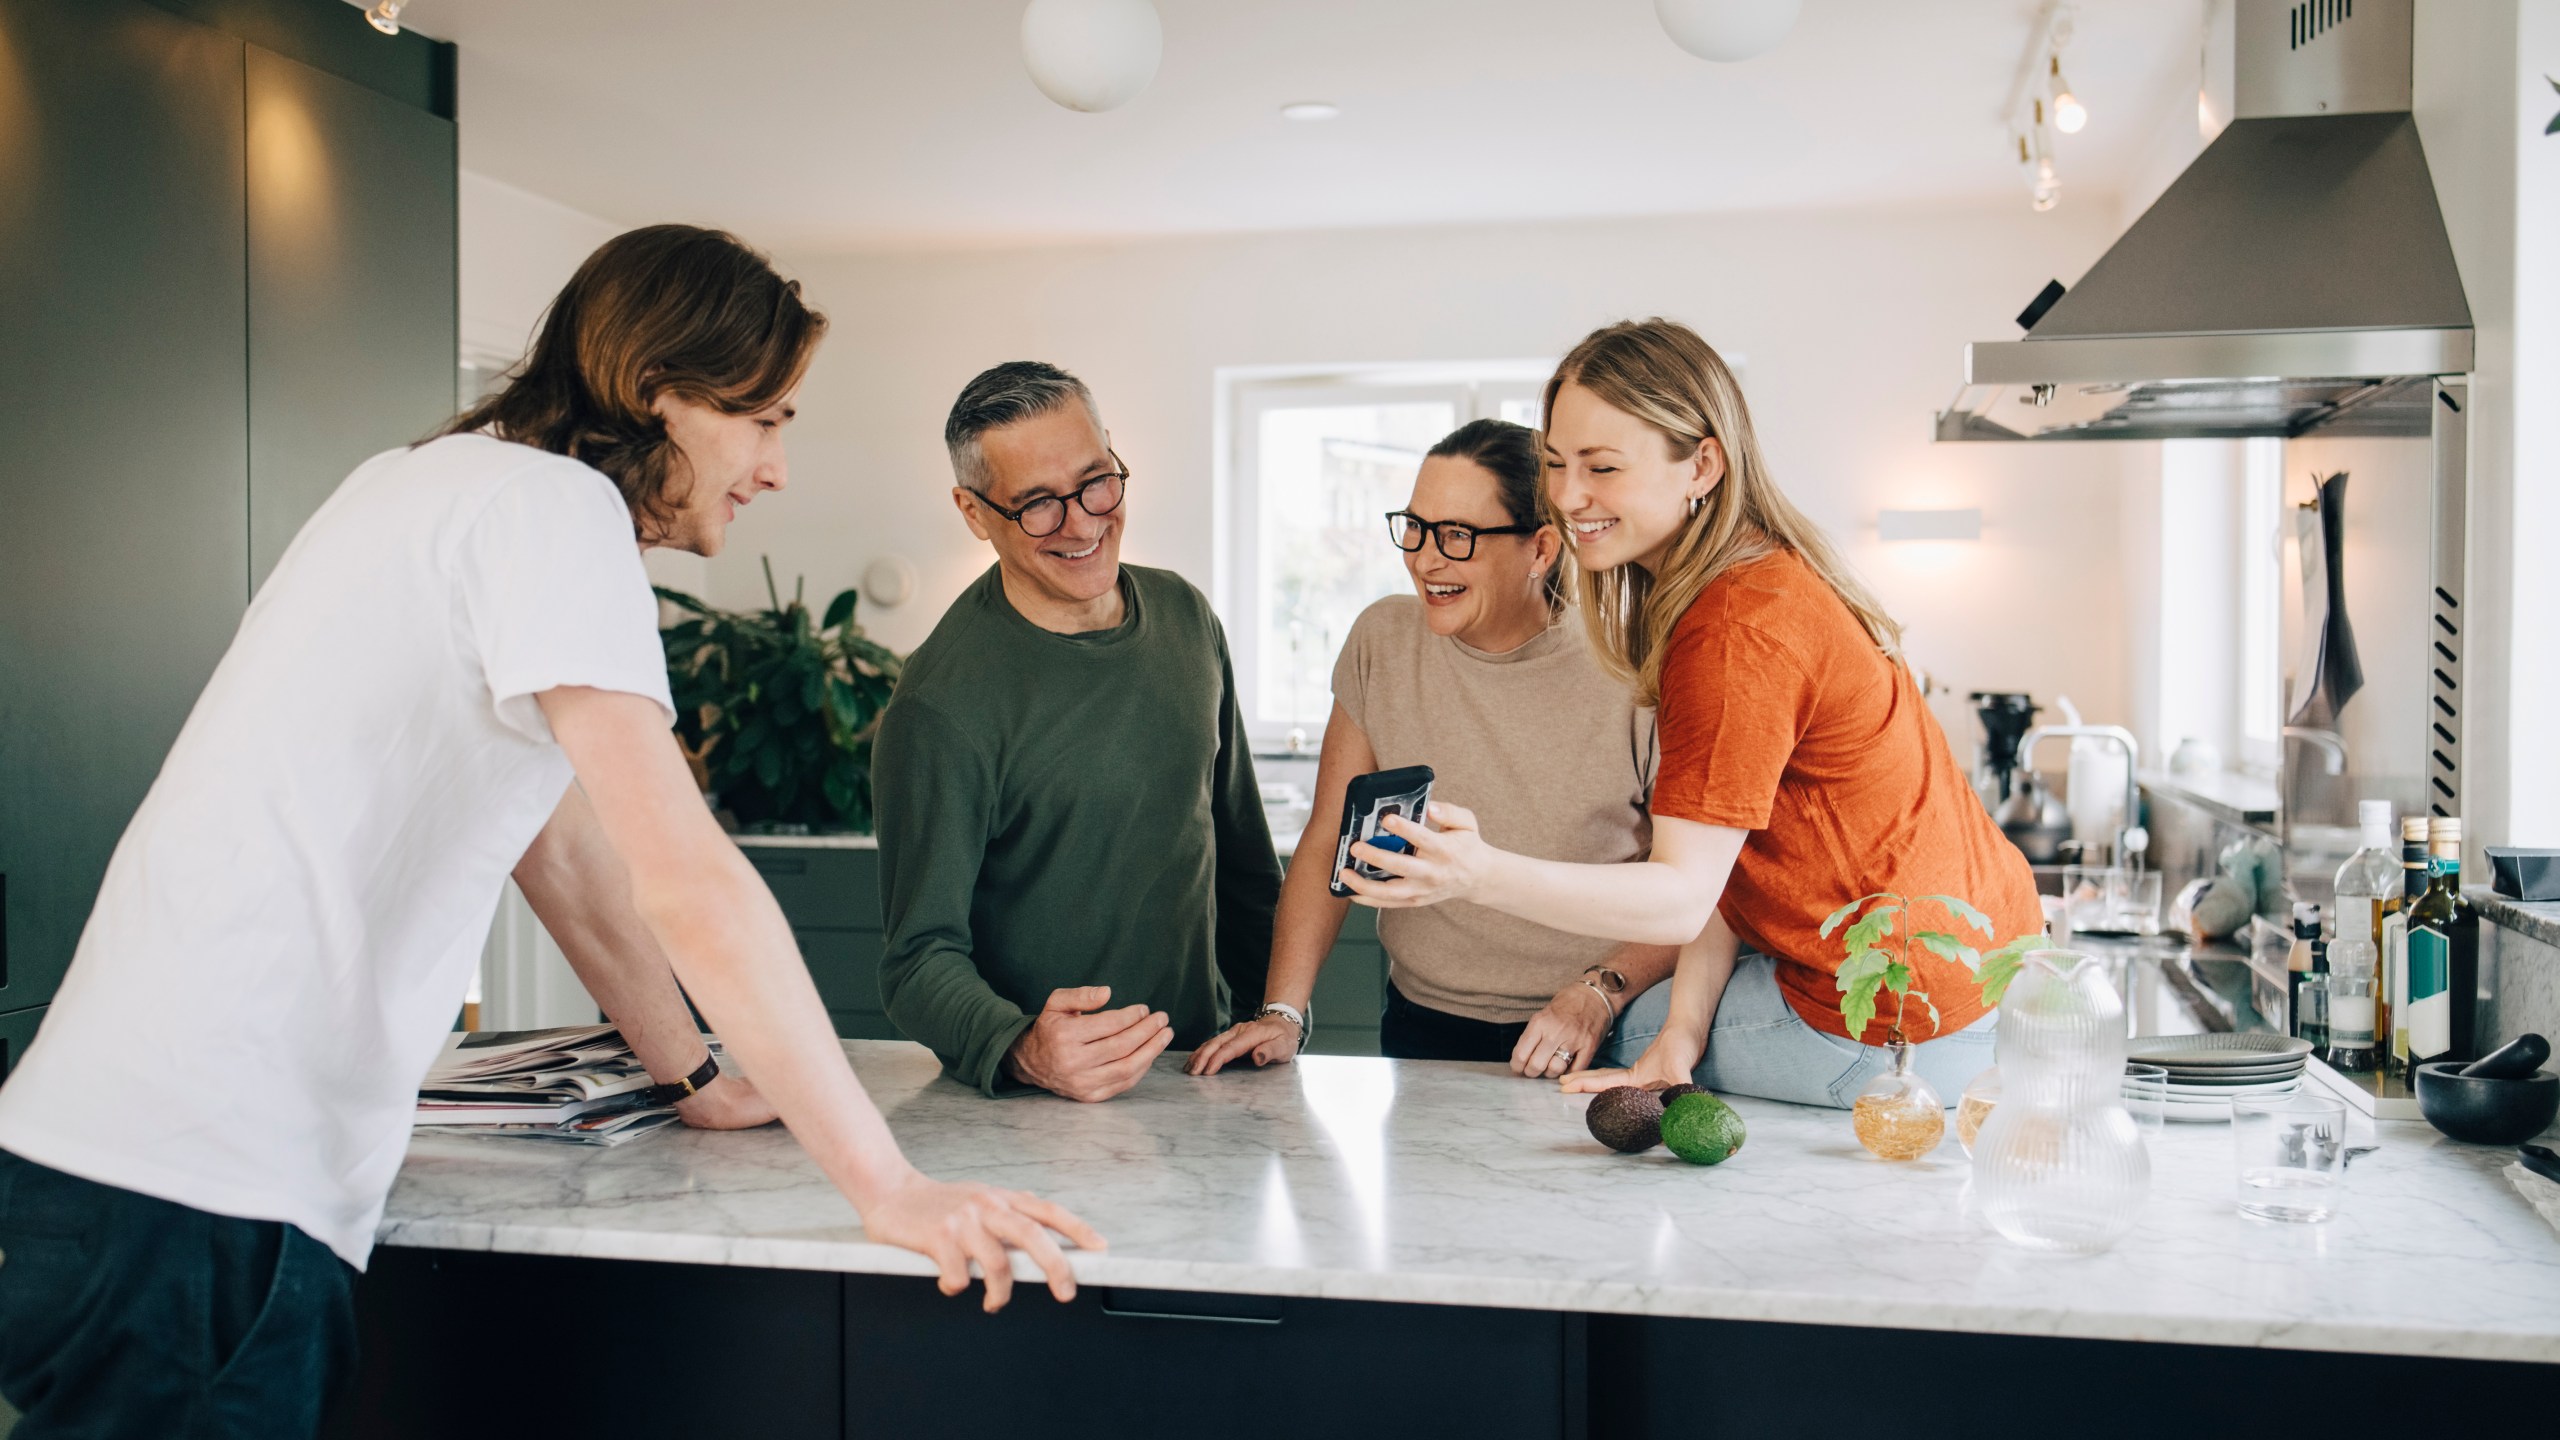 Maintaining open communication with your parents and knowing the definite goal of your move can help get you through the challenges of moving back home.